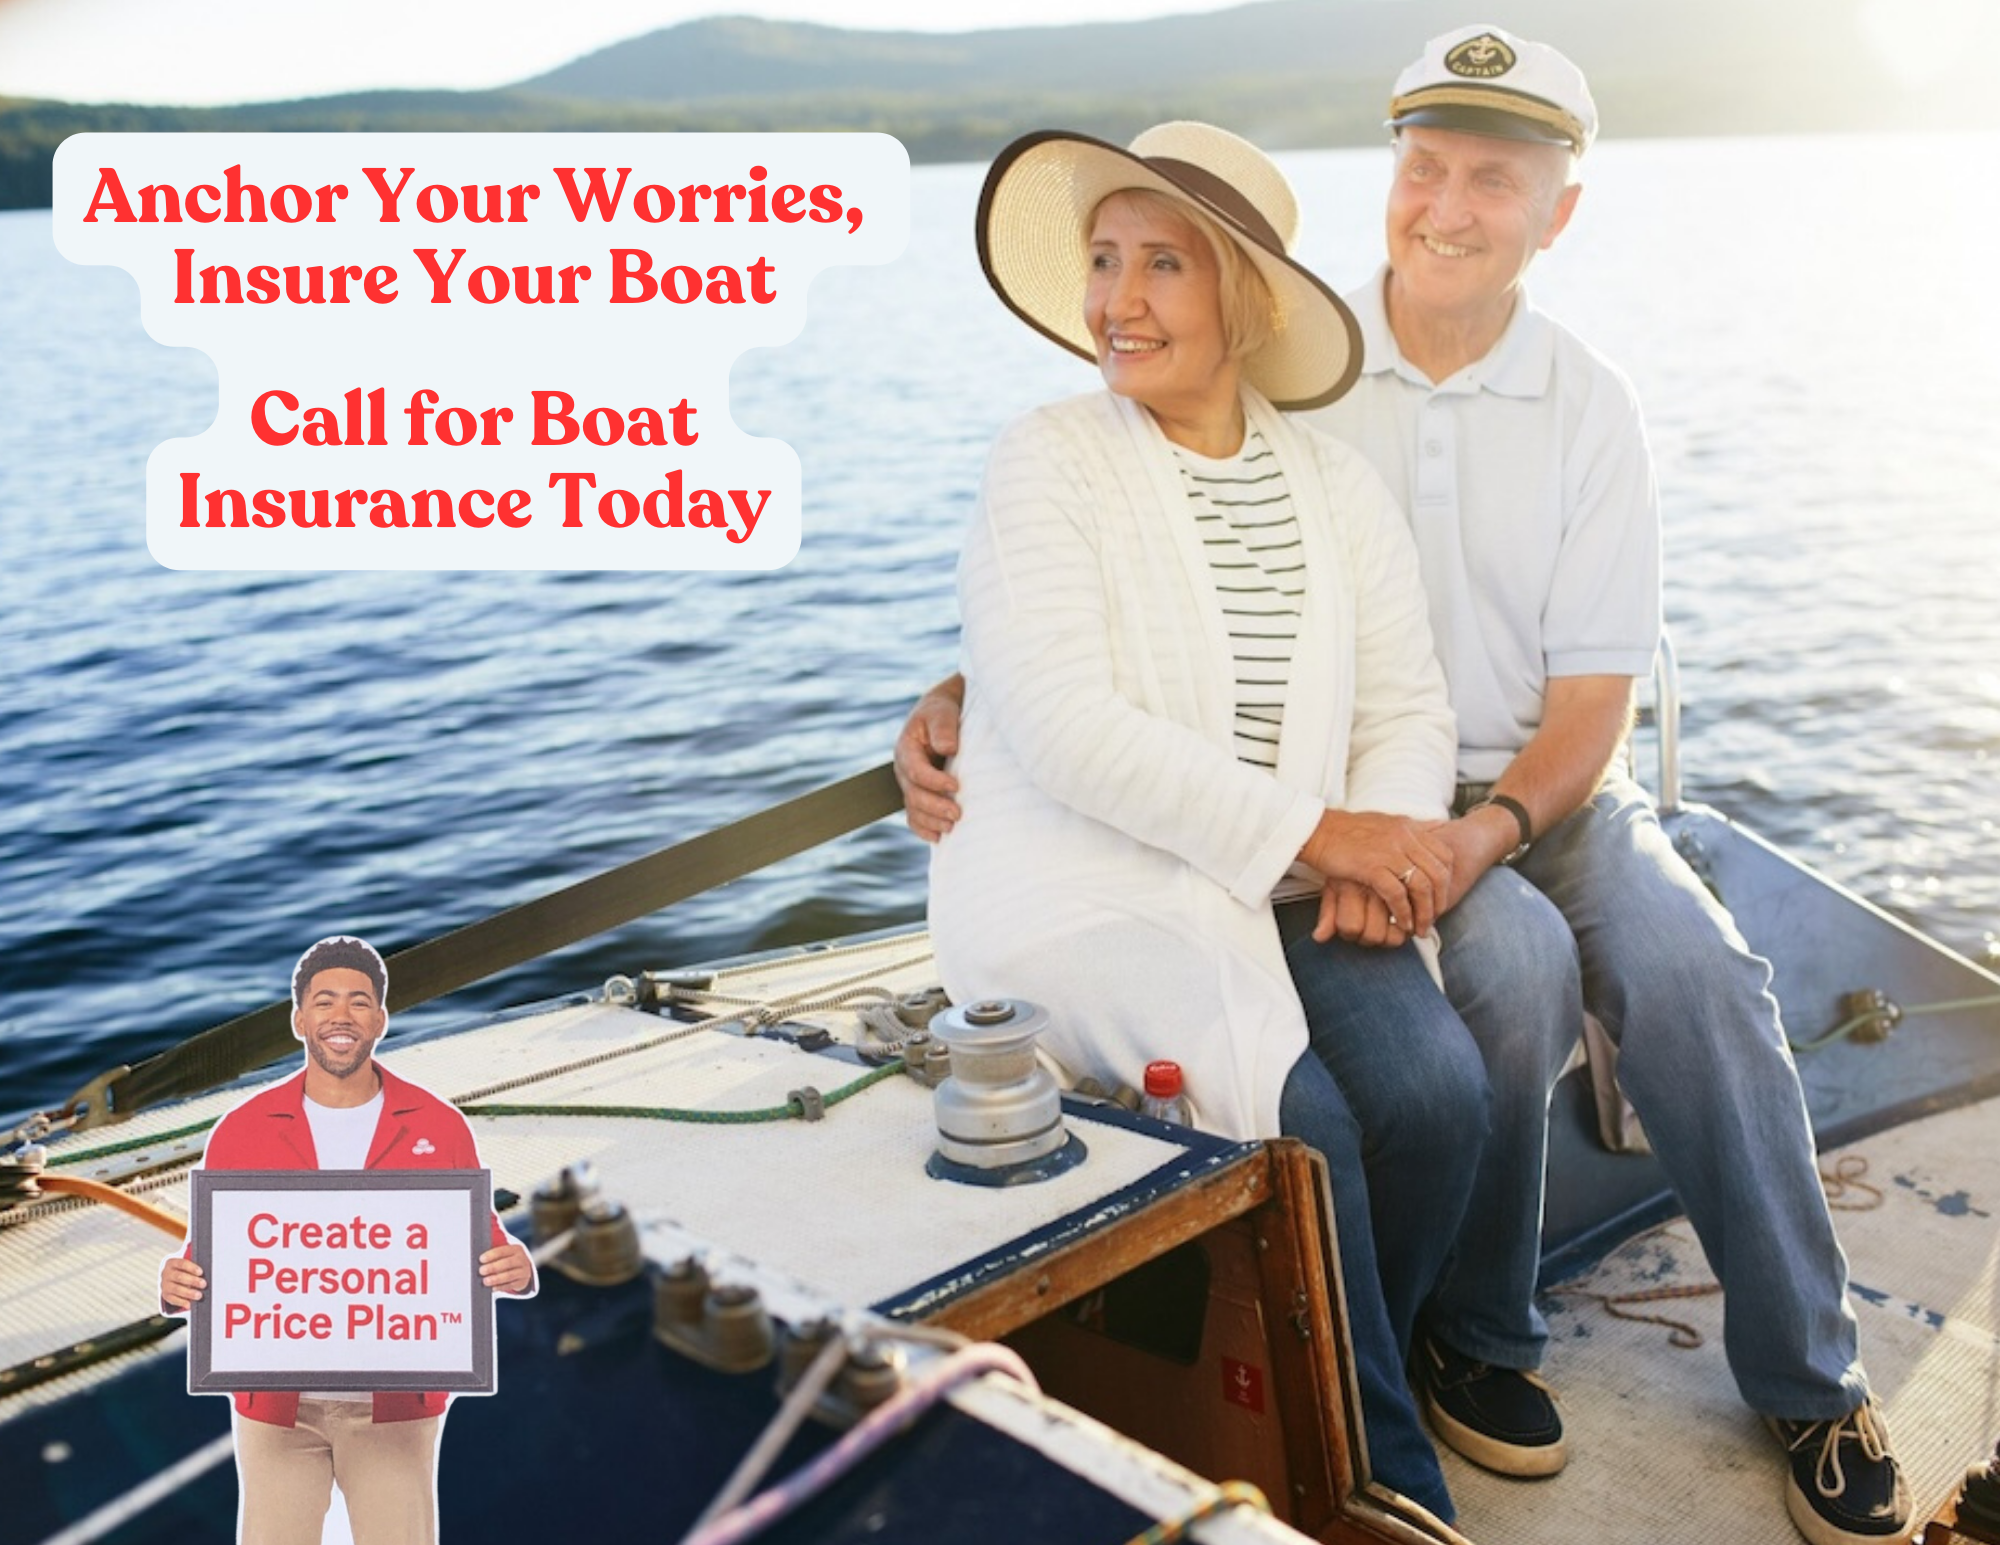 Anchor your worries, insure your boat. Call for boat insurance today! Aaron Slater Jr - State Farm Insurance Agent Columbia (240)755-0133